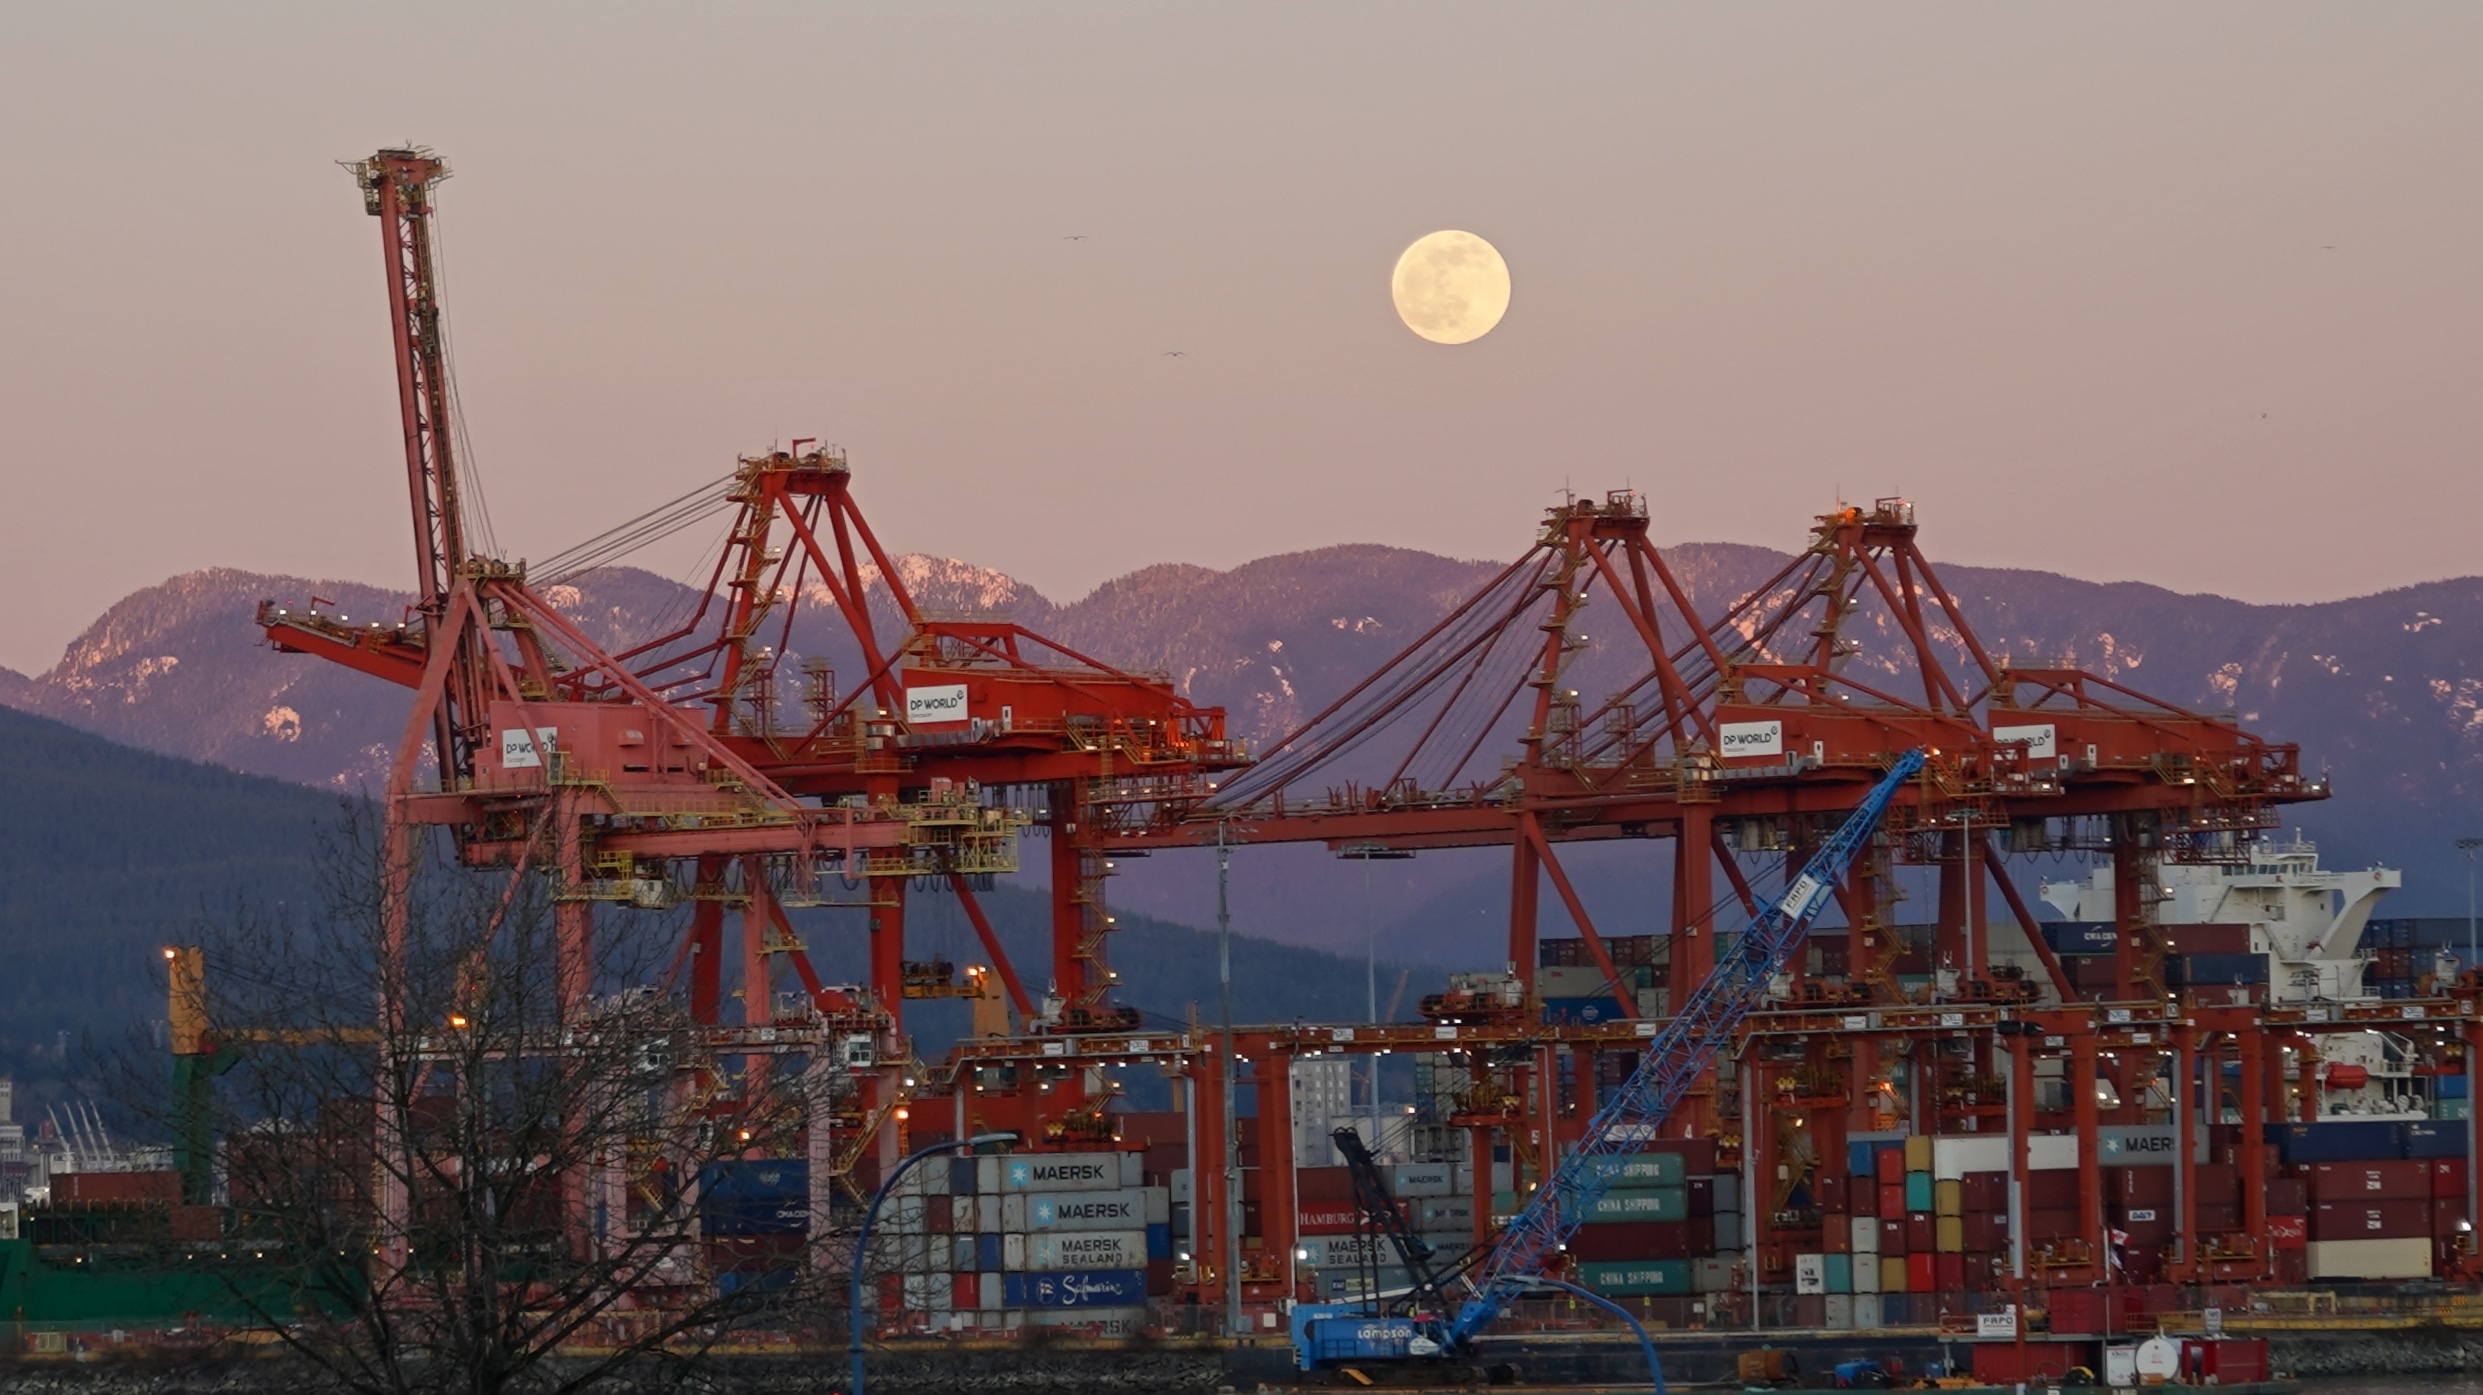 Cranes and full moon